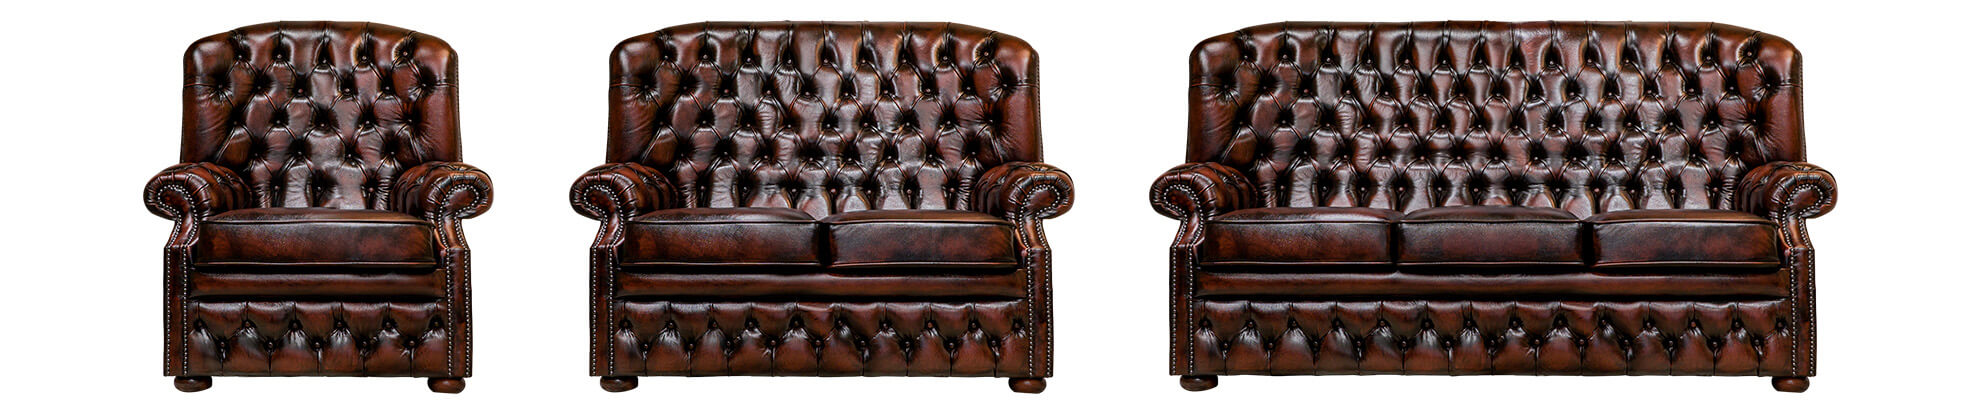 Classic Deluxe chesterfield kanapé